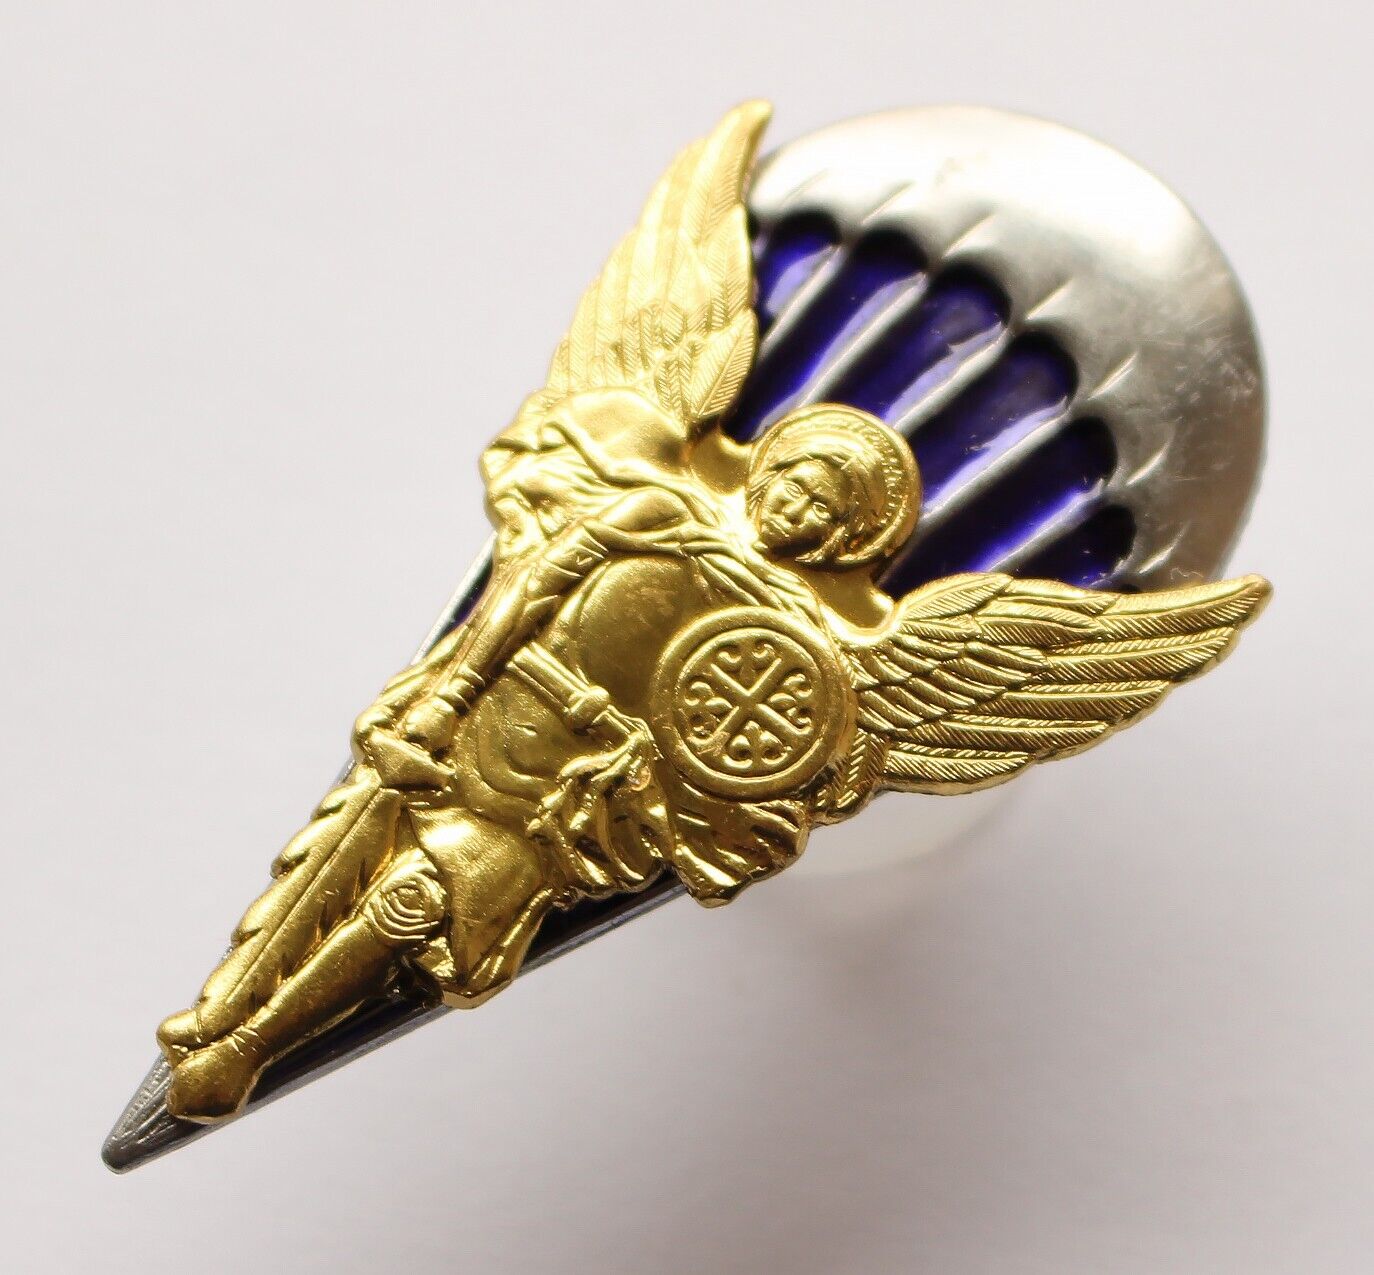 UKRAINIAN ARMY BADGE  Paratroopers Airborne Troops Medal Skydiver Archangel Michael VDVGold Silver